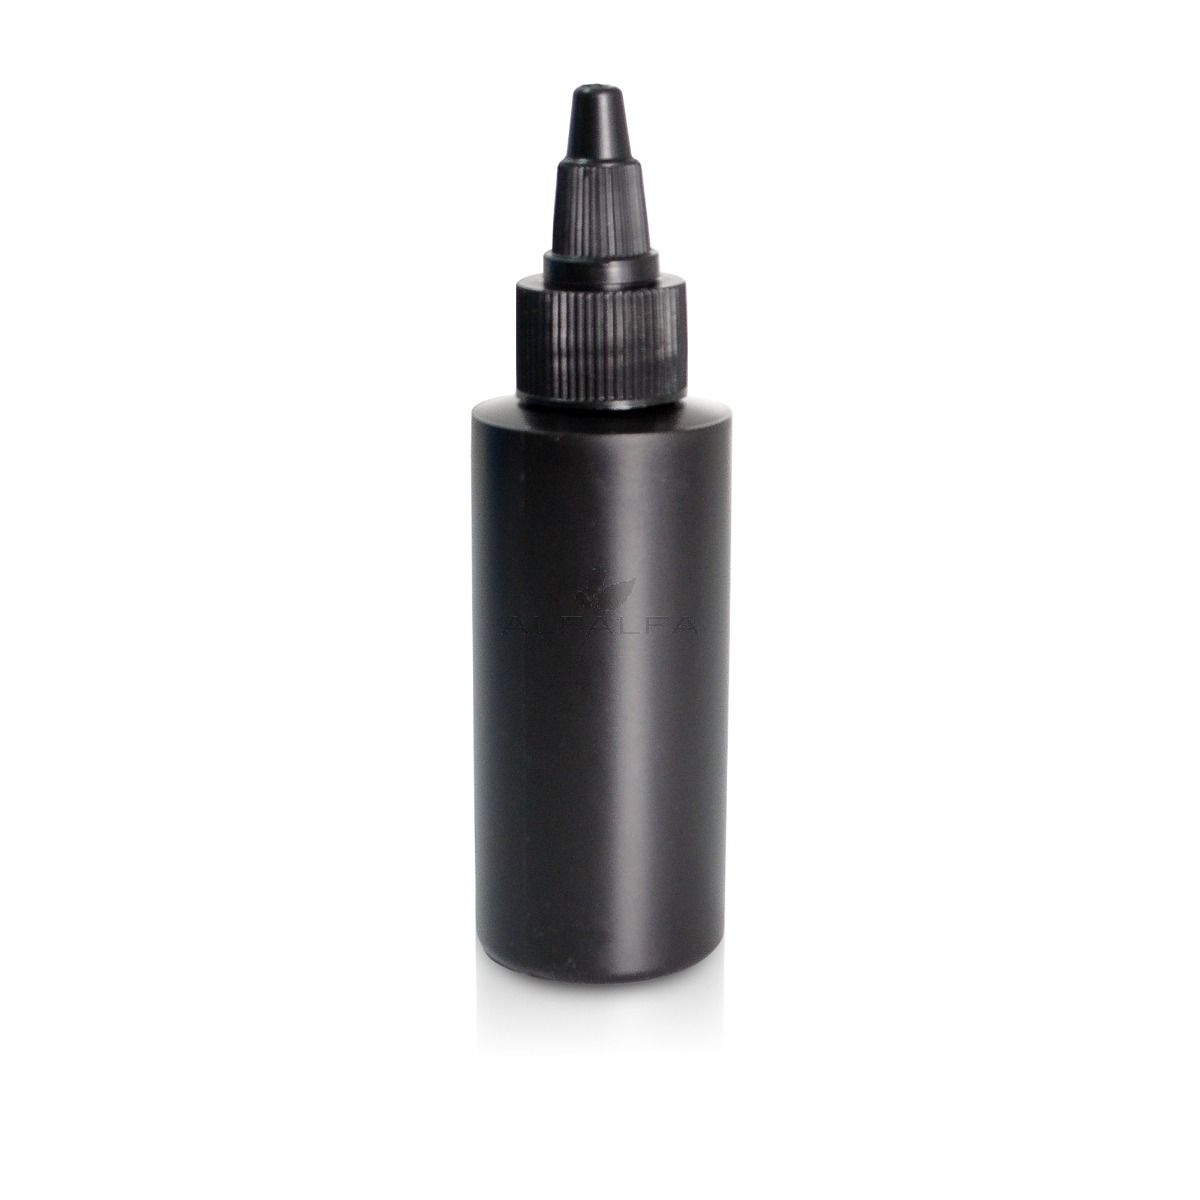 Empty Black HDPE Cylinder Bottle with Twisted Cap